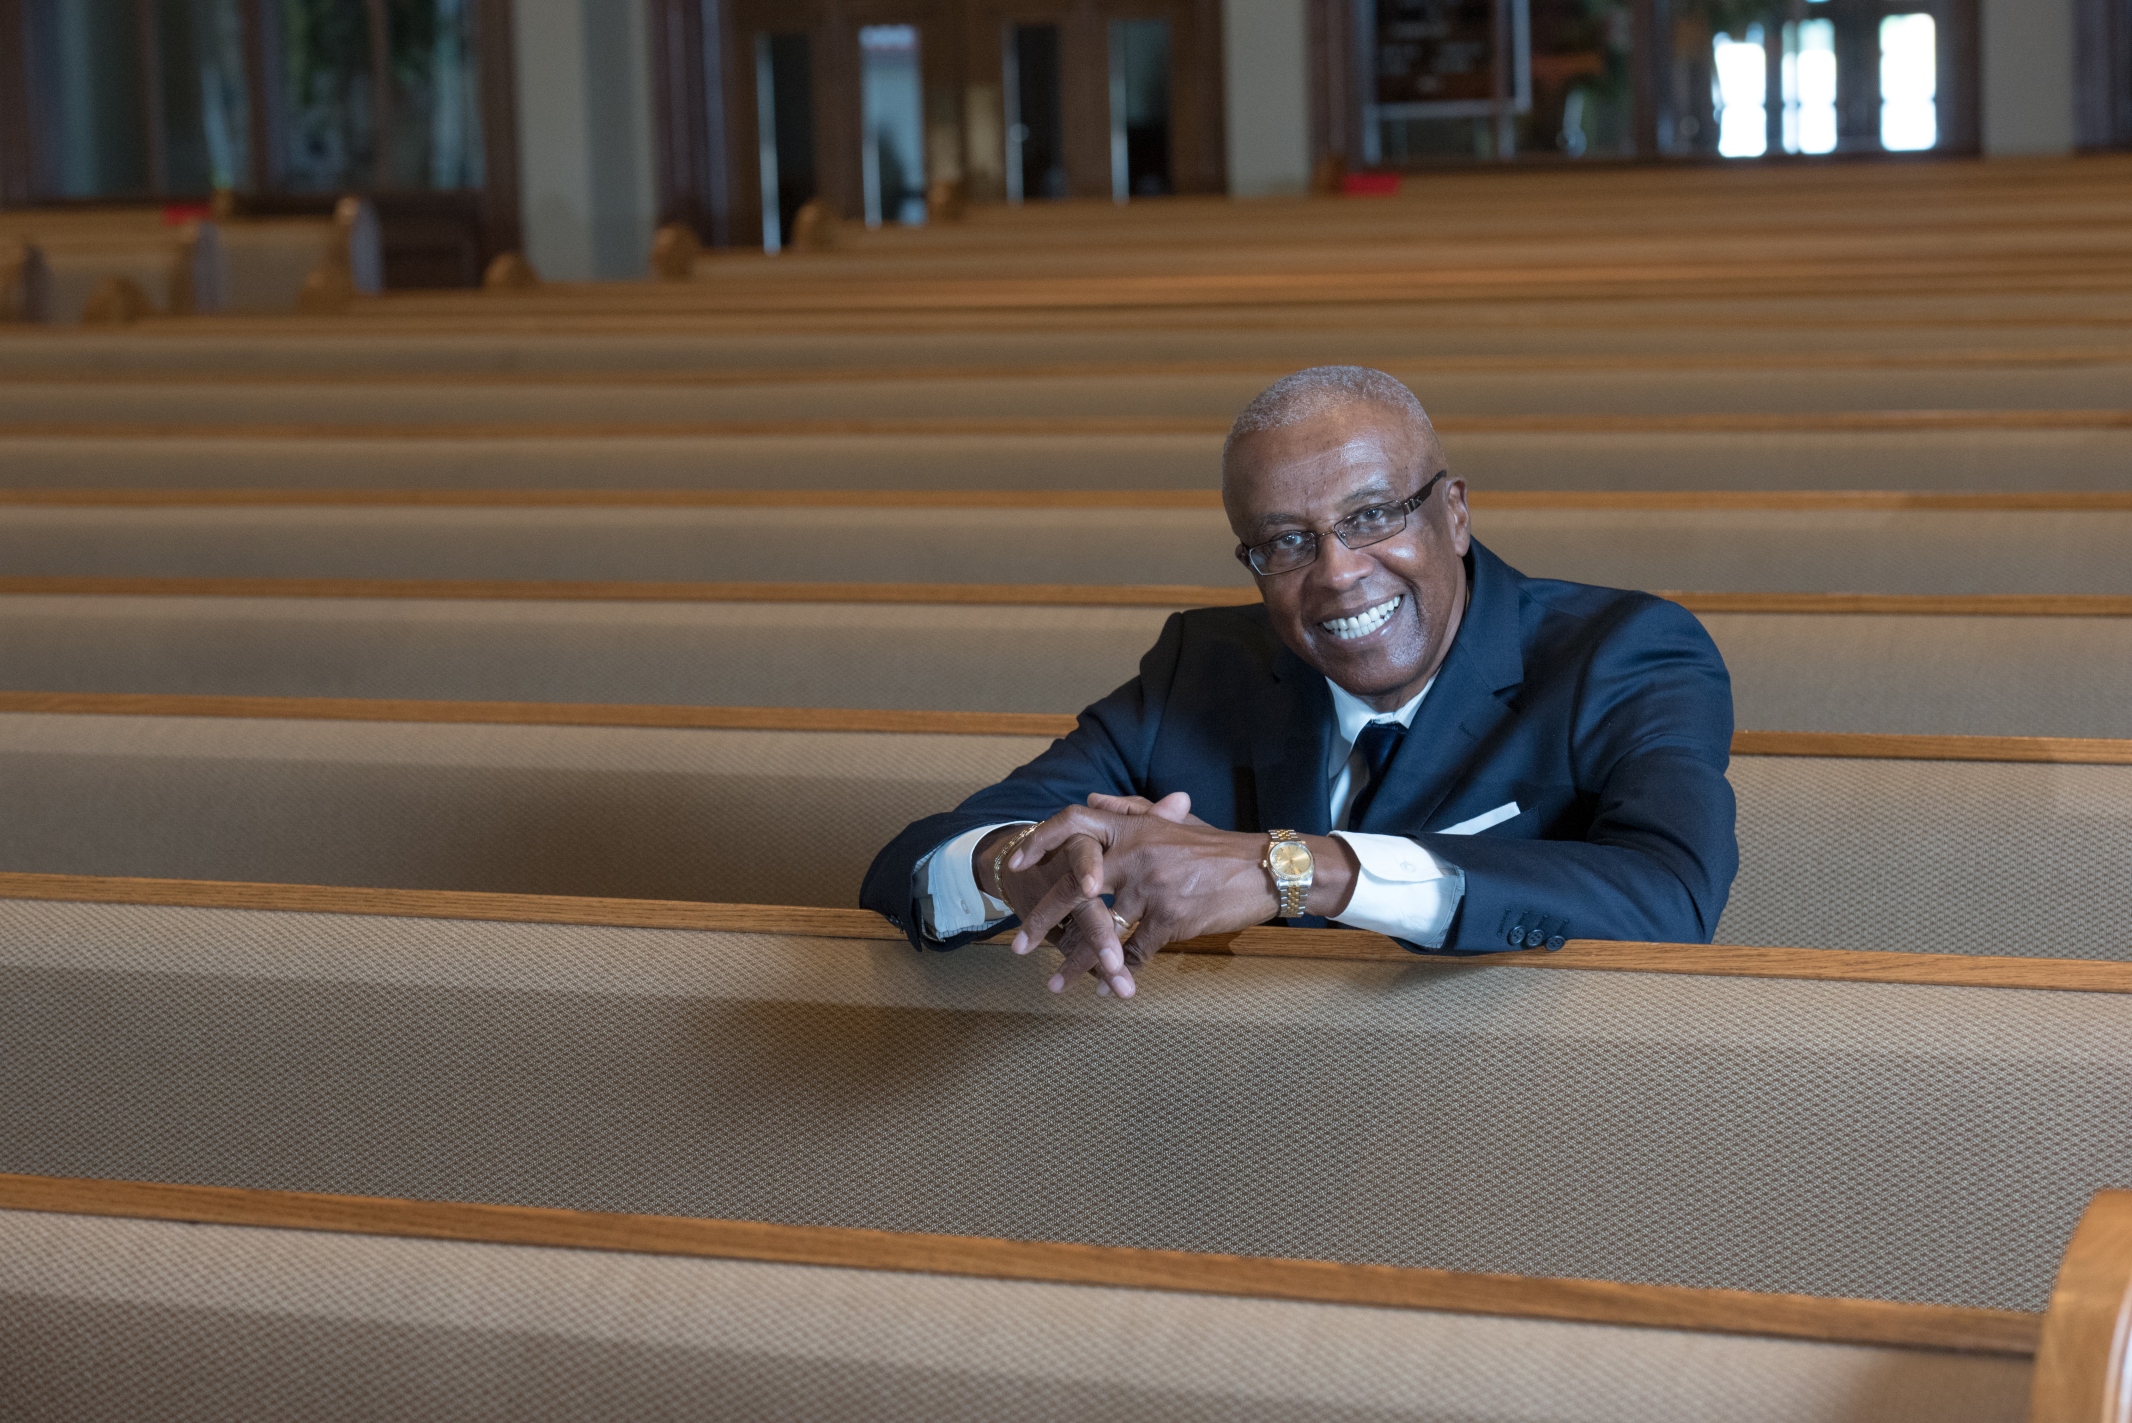 Reverend Carl Moore sits in the pews of a church